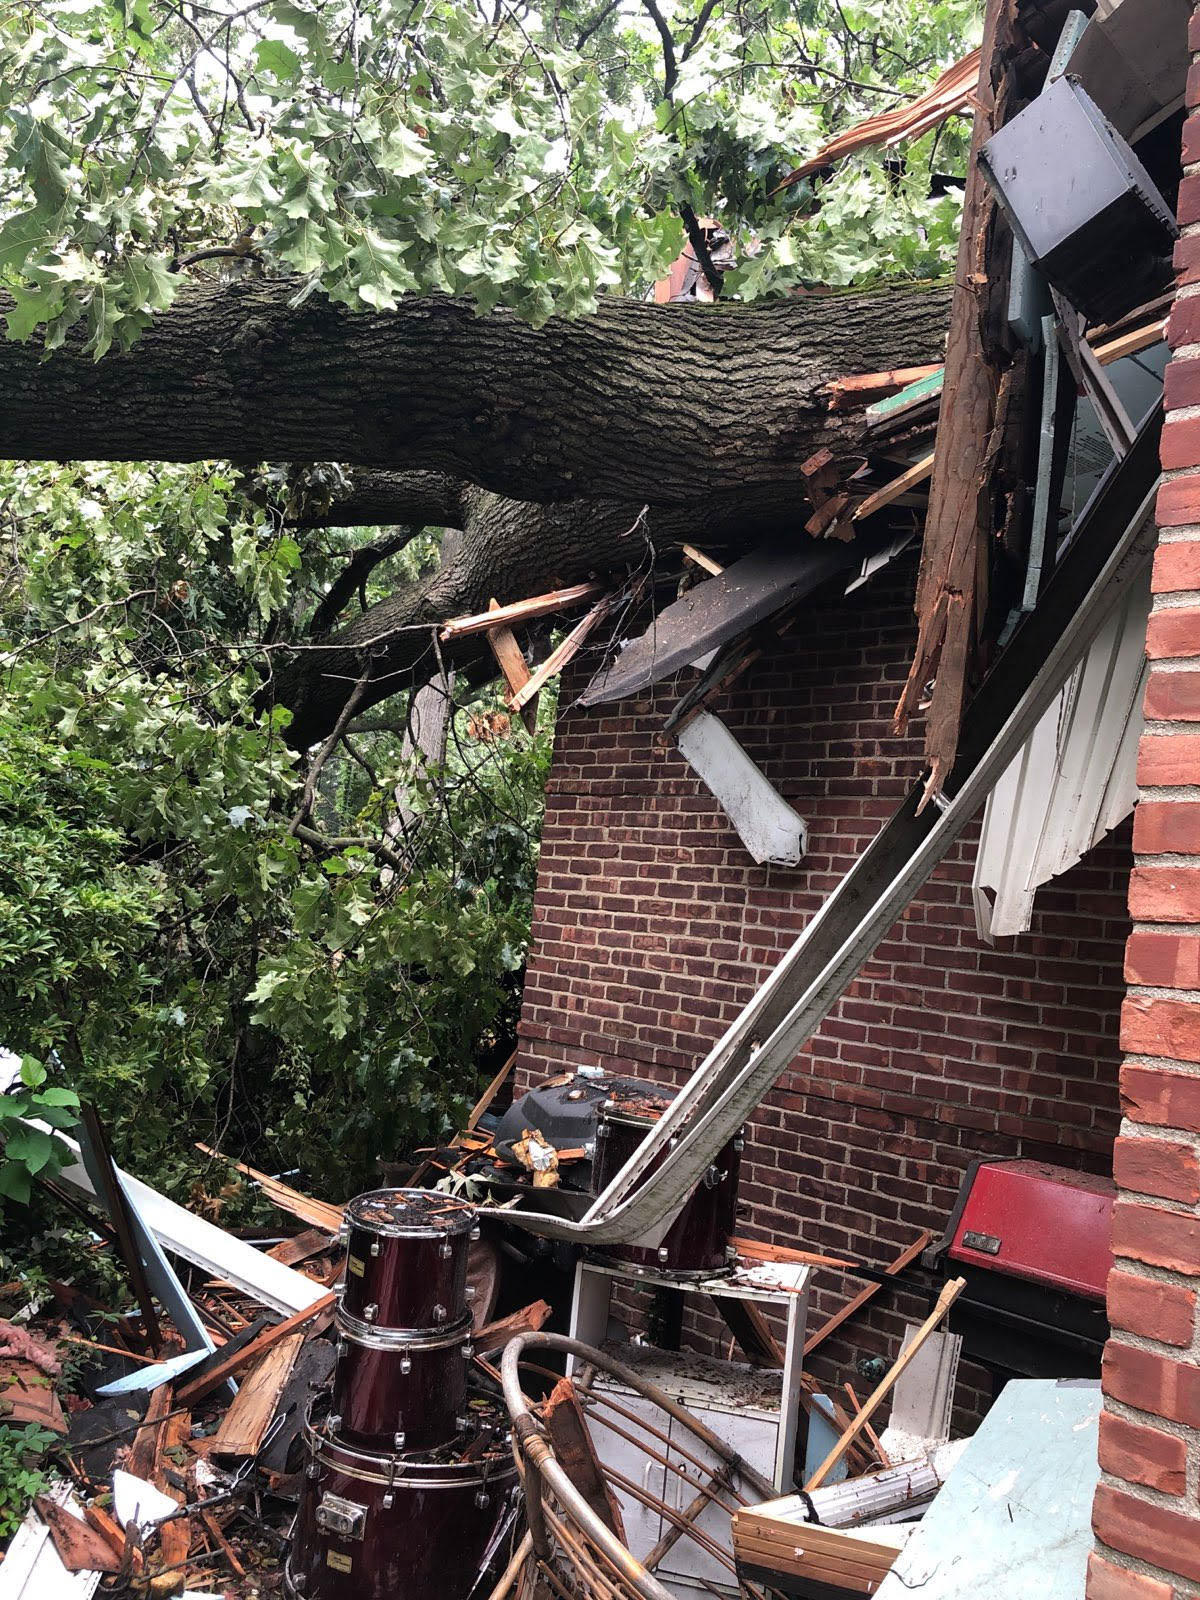 Don't let storm damage stress you out even more than it has to! Our trained professionals have all the tools we need to help mitigate the situation.